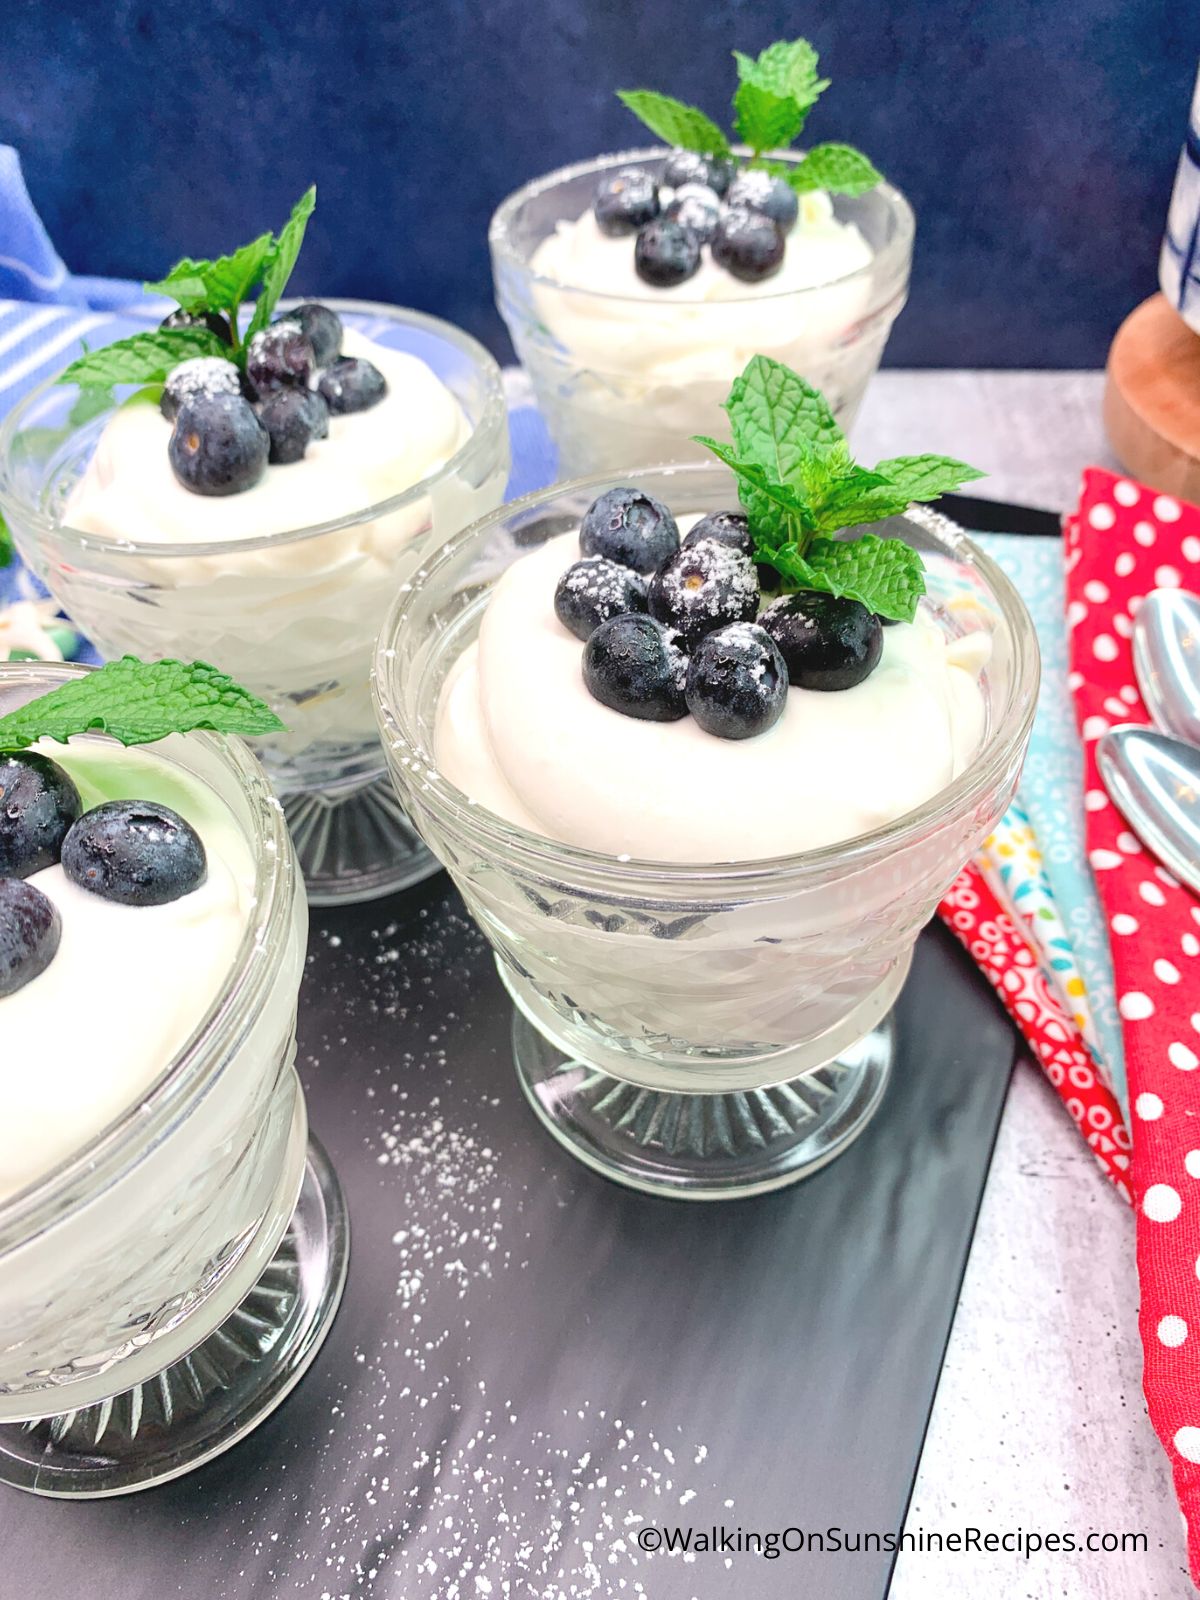 Serving cheesecake pudding in glass pudding cups with fresh berries and mint.